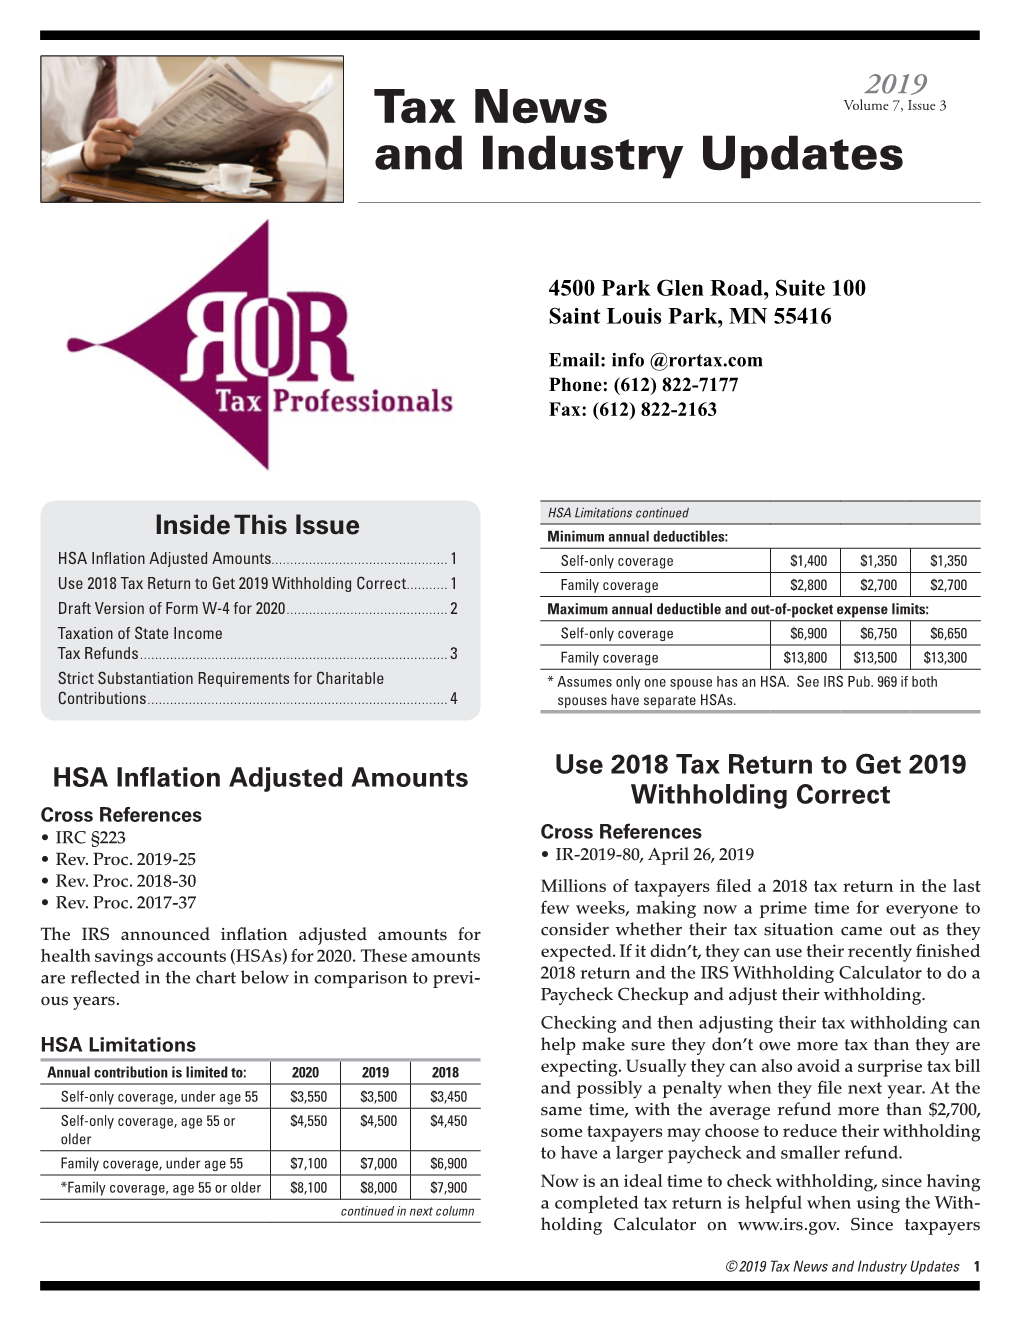 Tax News and Industry Updates